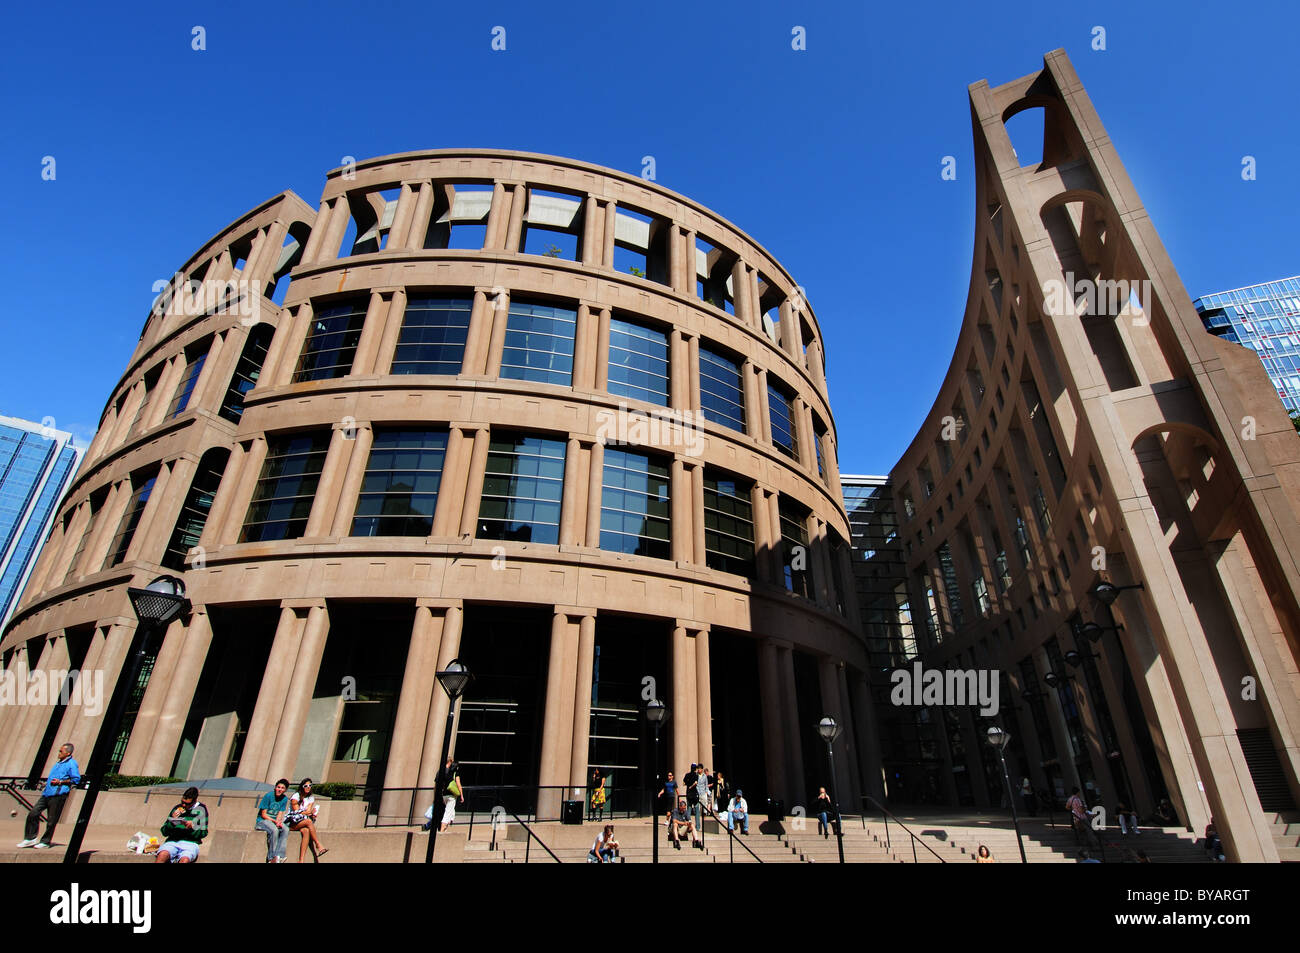 Vancouver public library, a design based on the Coliseum in Rome Stock Photo